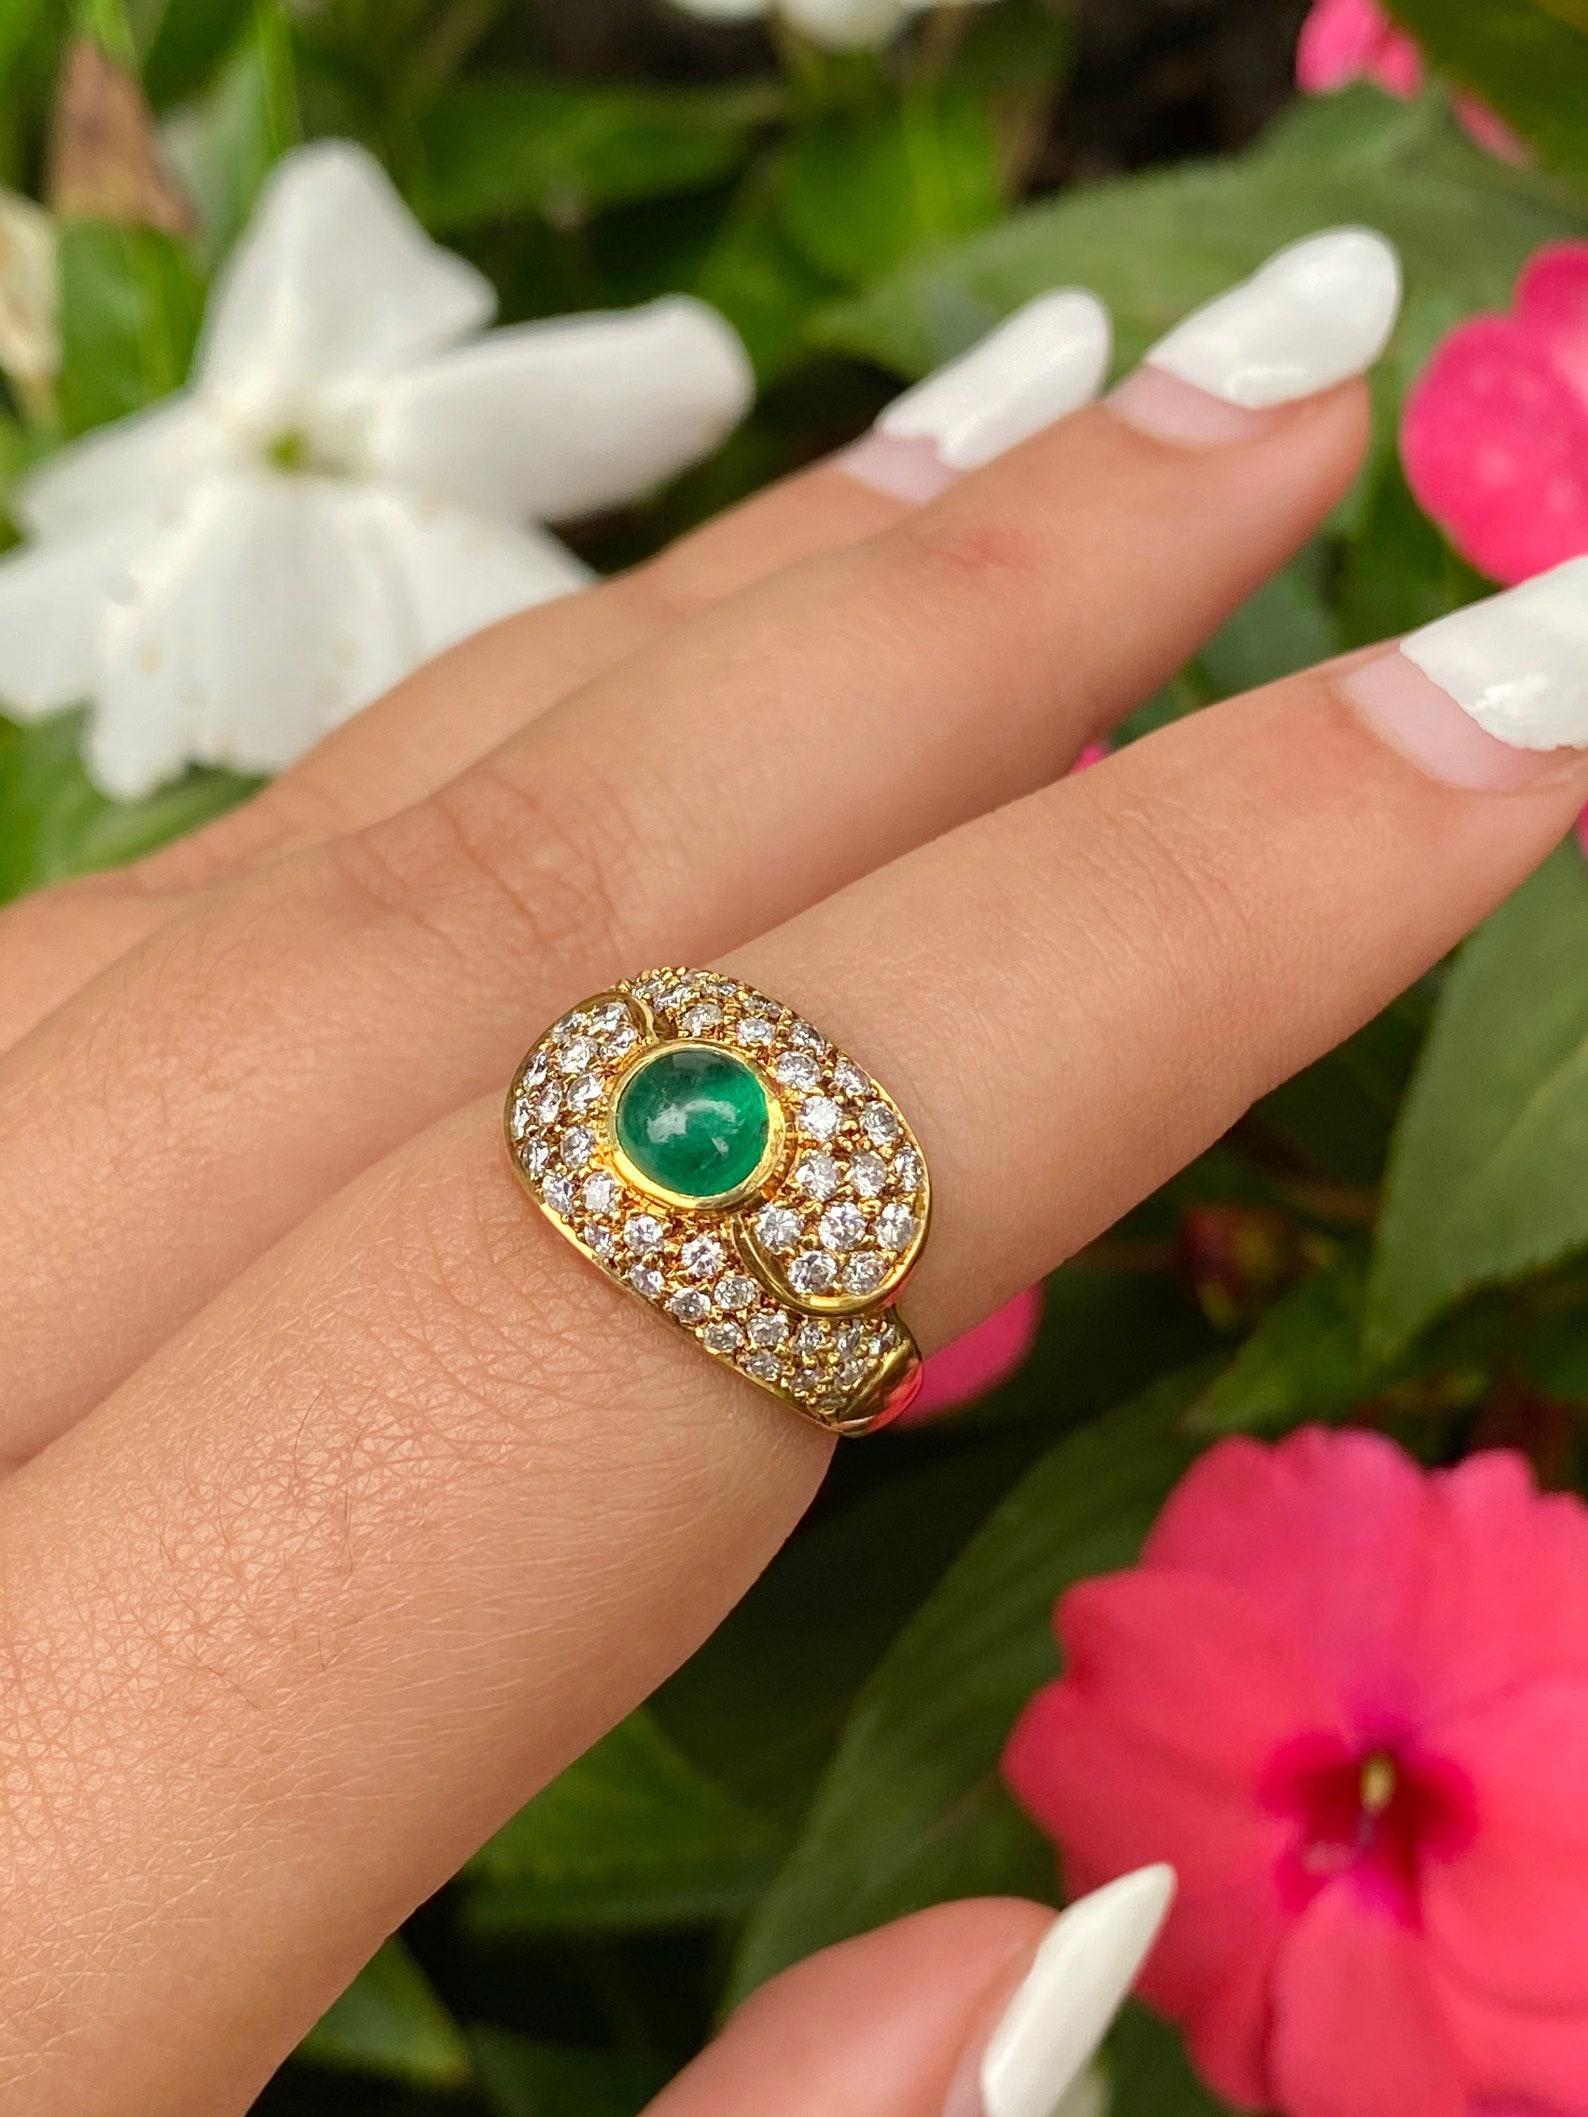 Cabochon cut natural Colombian Emerald mounted in 18k yellow gold. Set with 1.02 carats in a round-cut natural diamond cluster.

✔ Natural Emerald
✔ Natural Diamonds
✔ Gold Karat: 18K
✔ Emerald Shape: Cabochon
✔ Emerald Weight: 0.90 carats
✔ Emerald